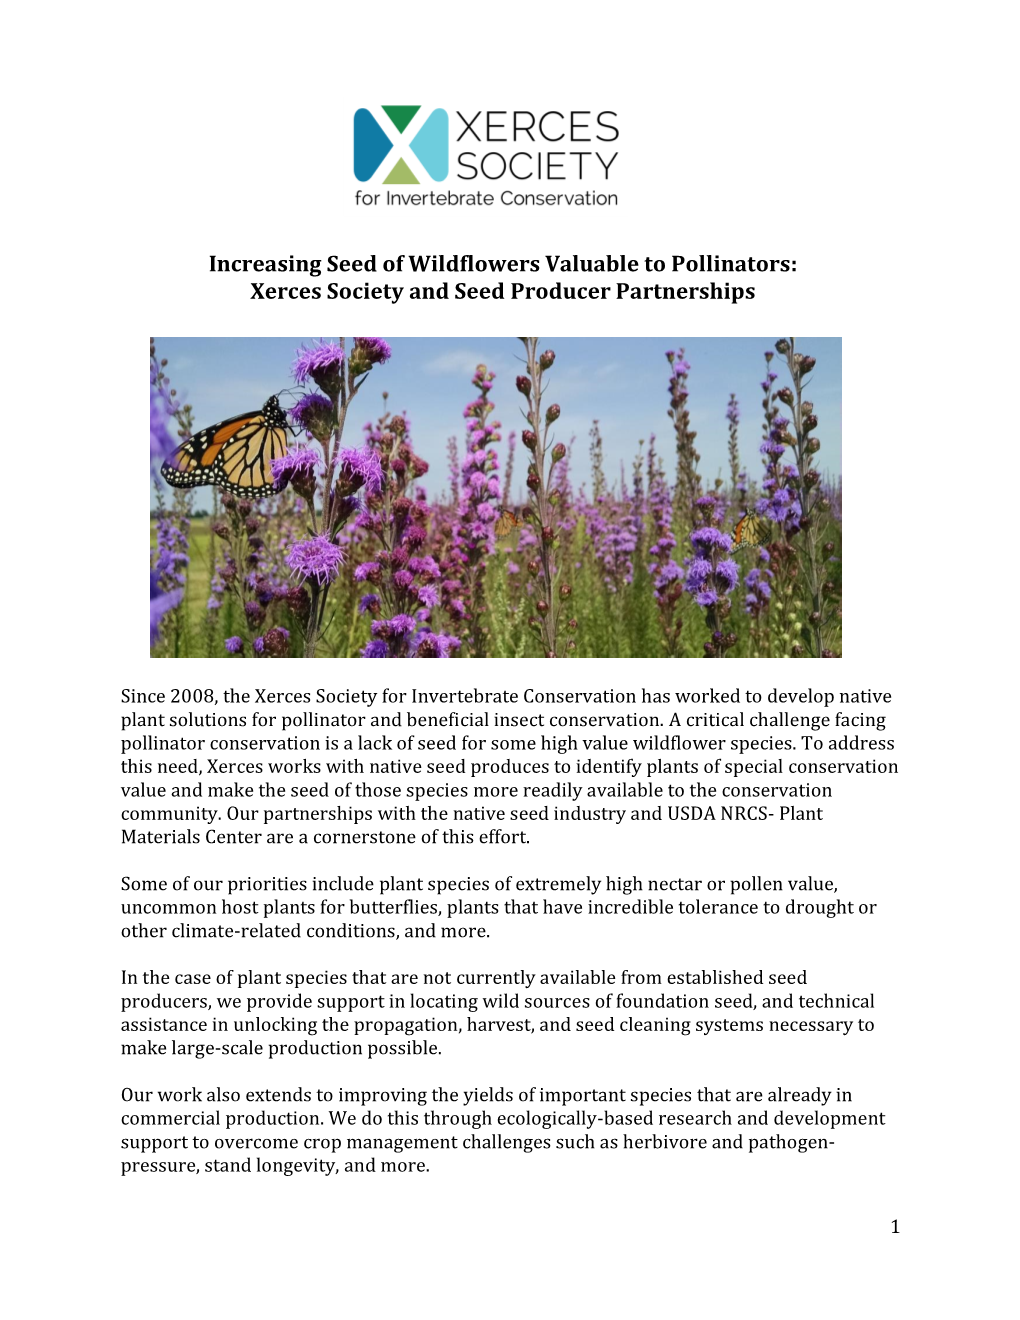 Increasing Seed of Wildflowers Valuable to Pollinators: Xerces Society and Seed Producer Partnerships